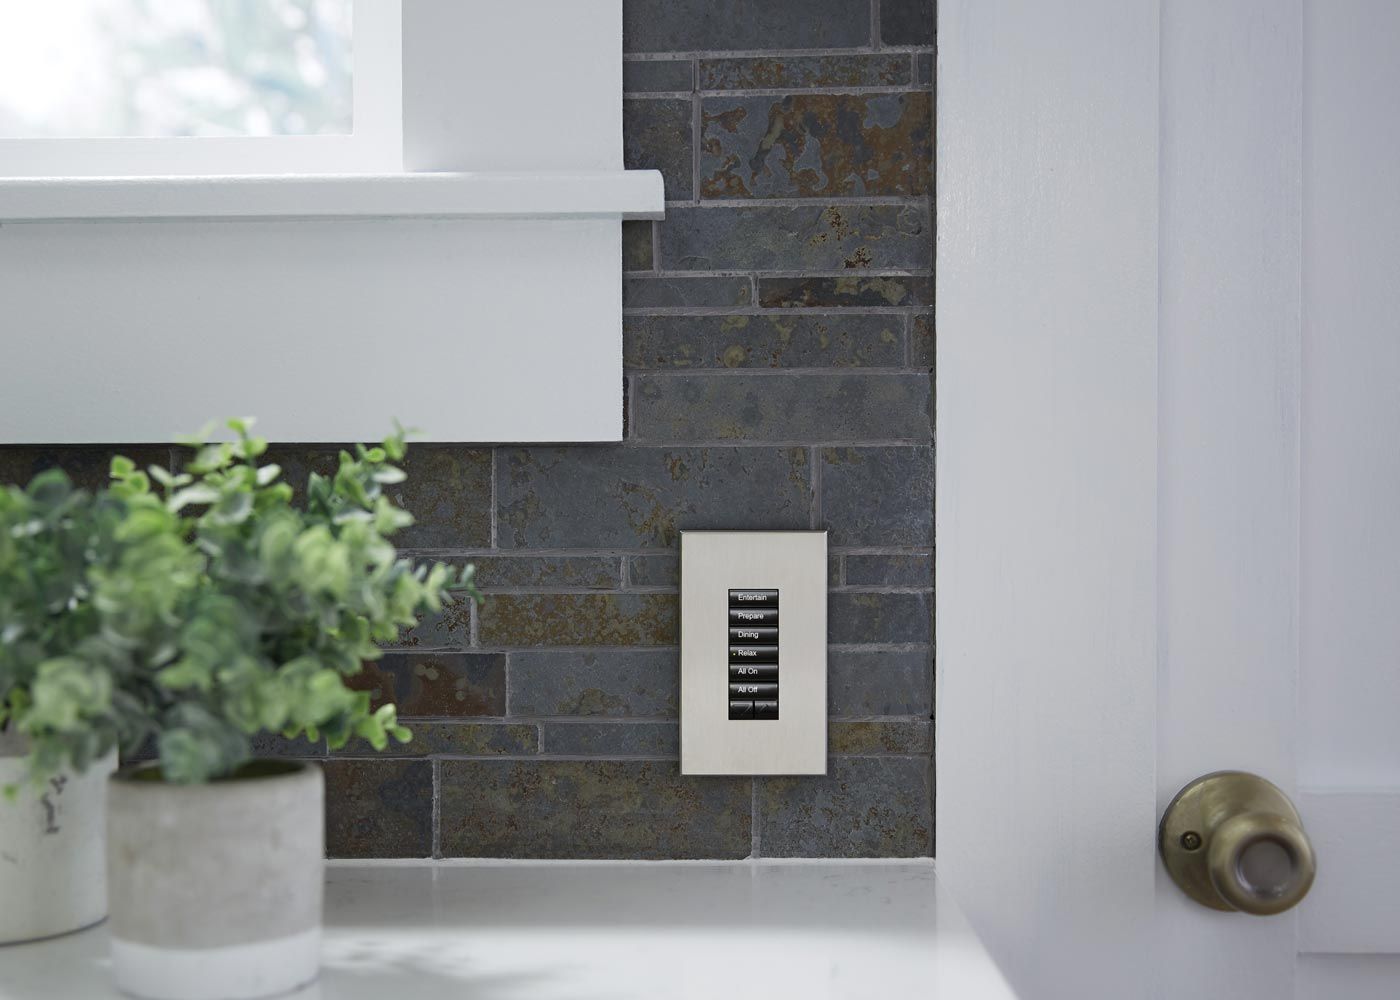 View of Lutron touchpanel on brick wall